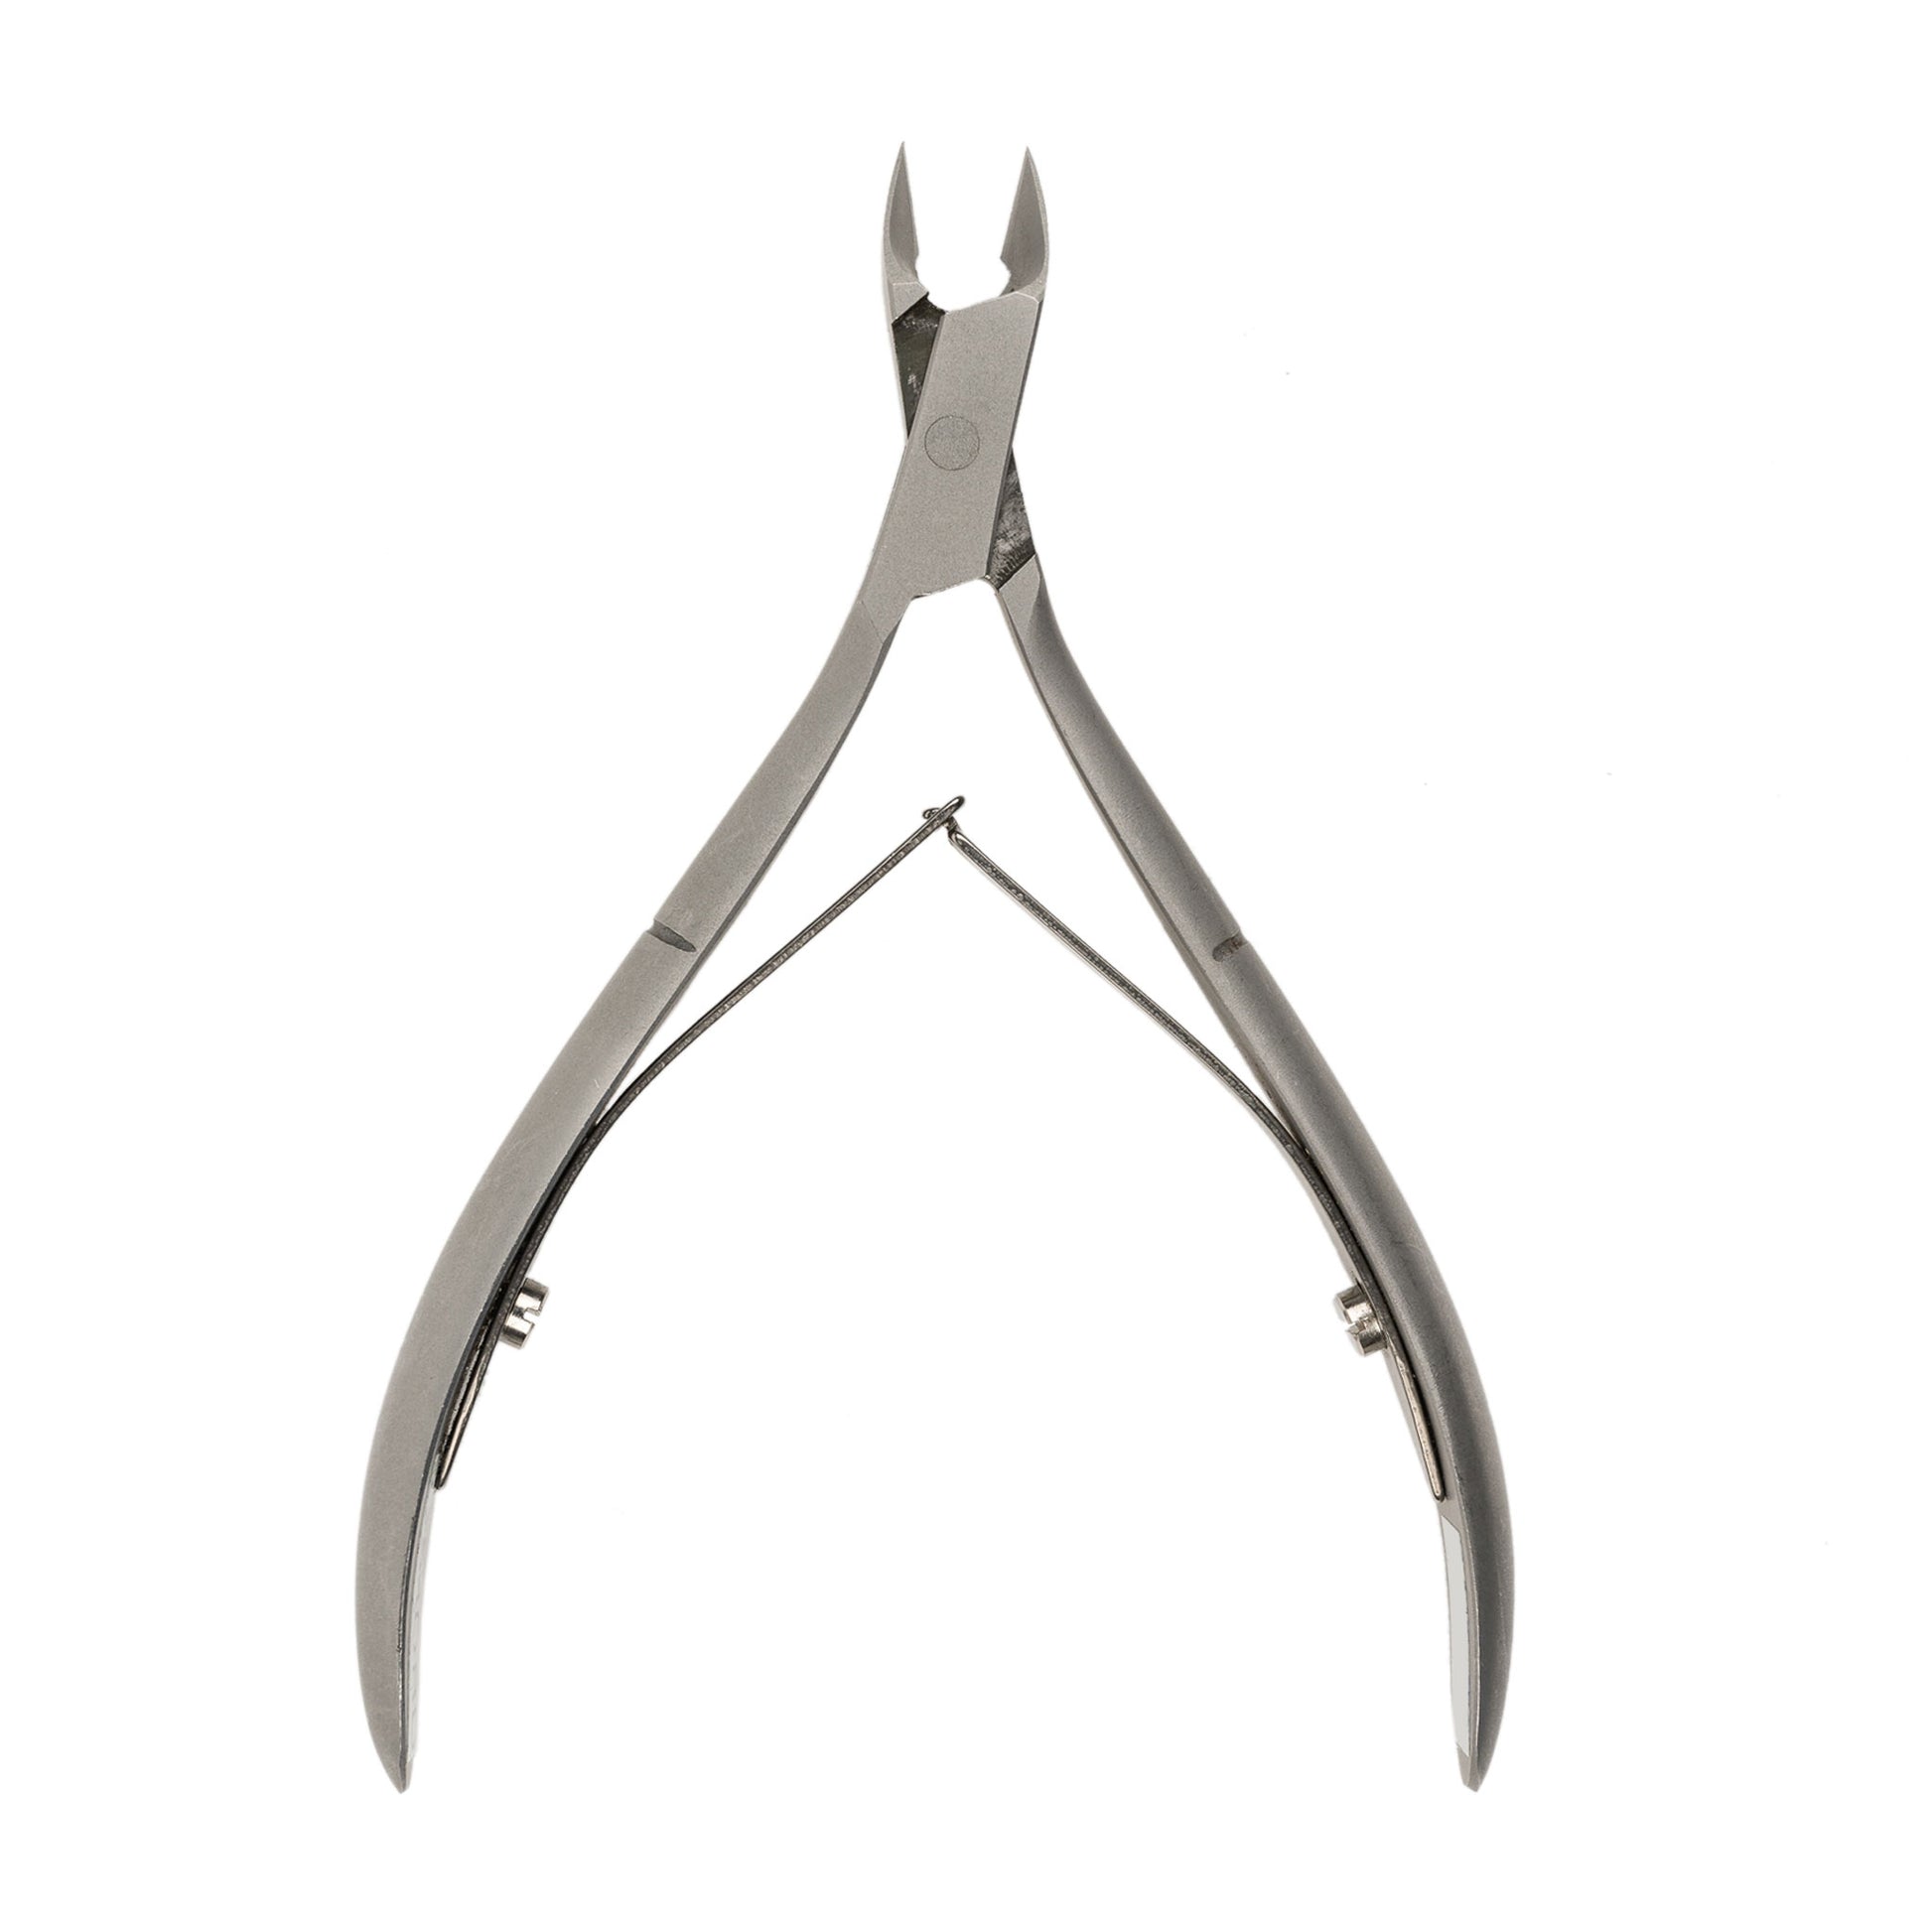 10 cm Podiatry Tissue Nippers (7 mm Straight Cut) 5-54A/RD Whole Overhead View